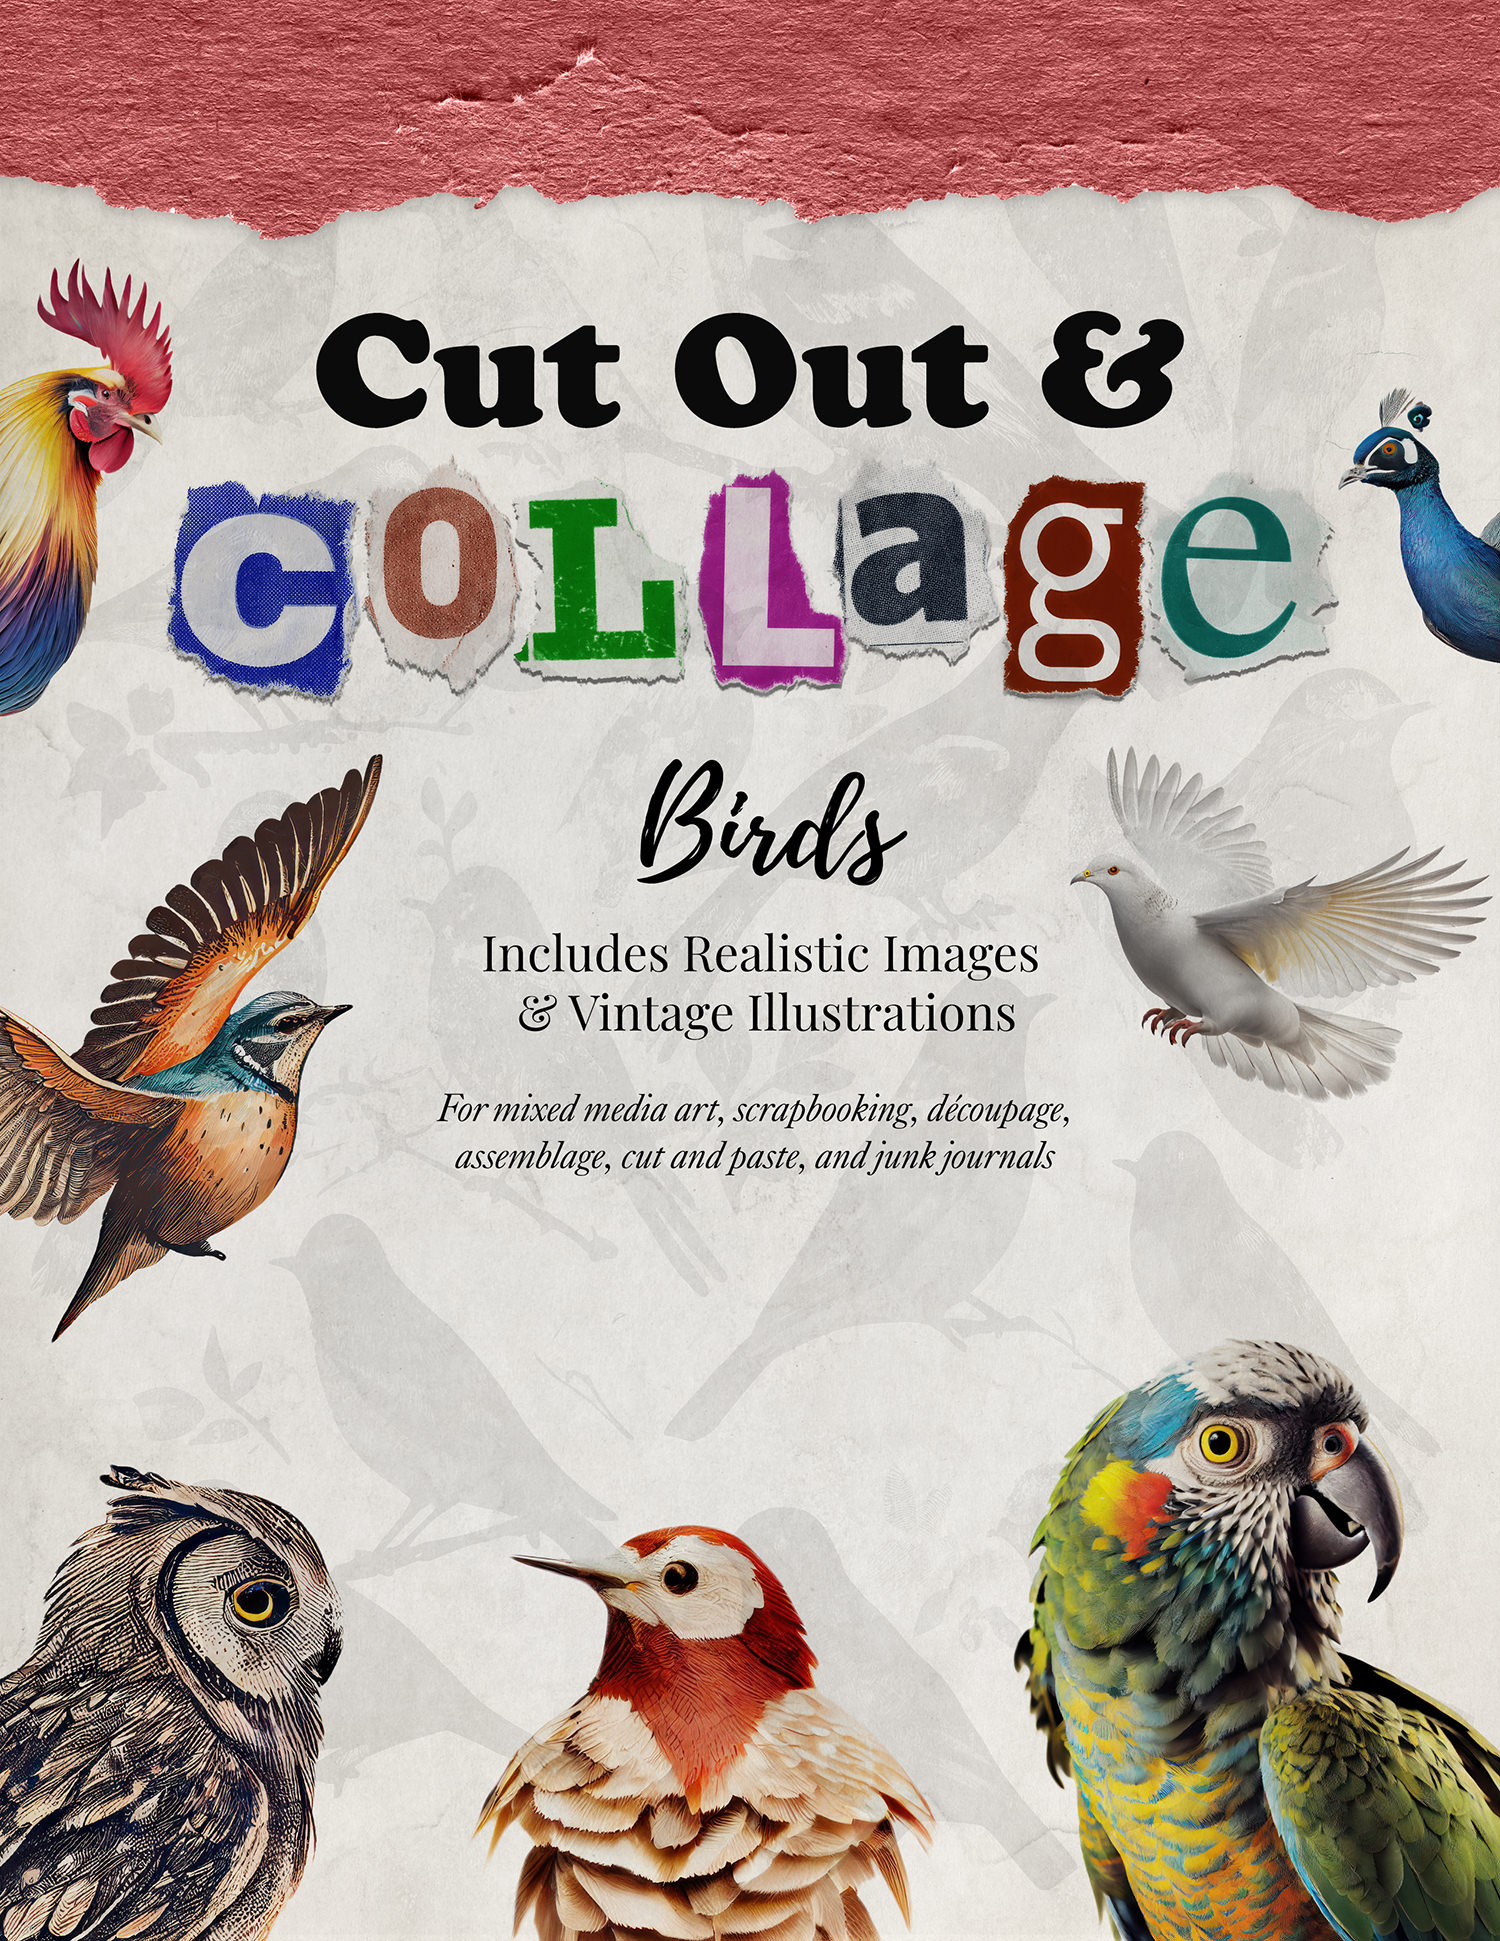 Cut Out and Collage: Birds